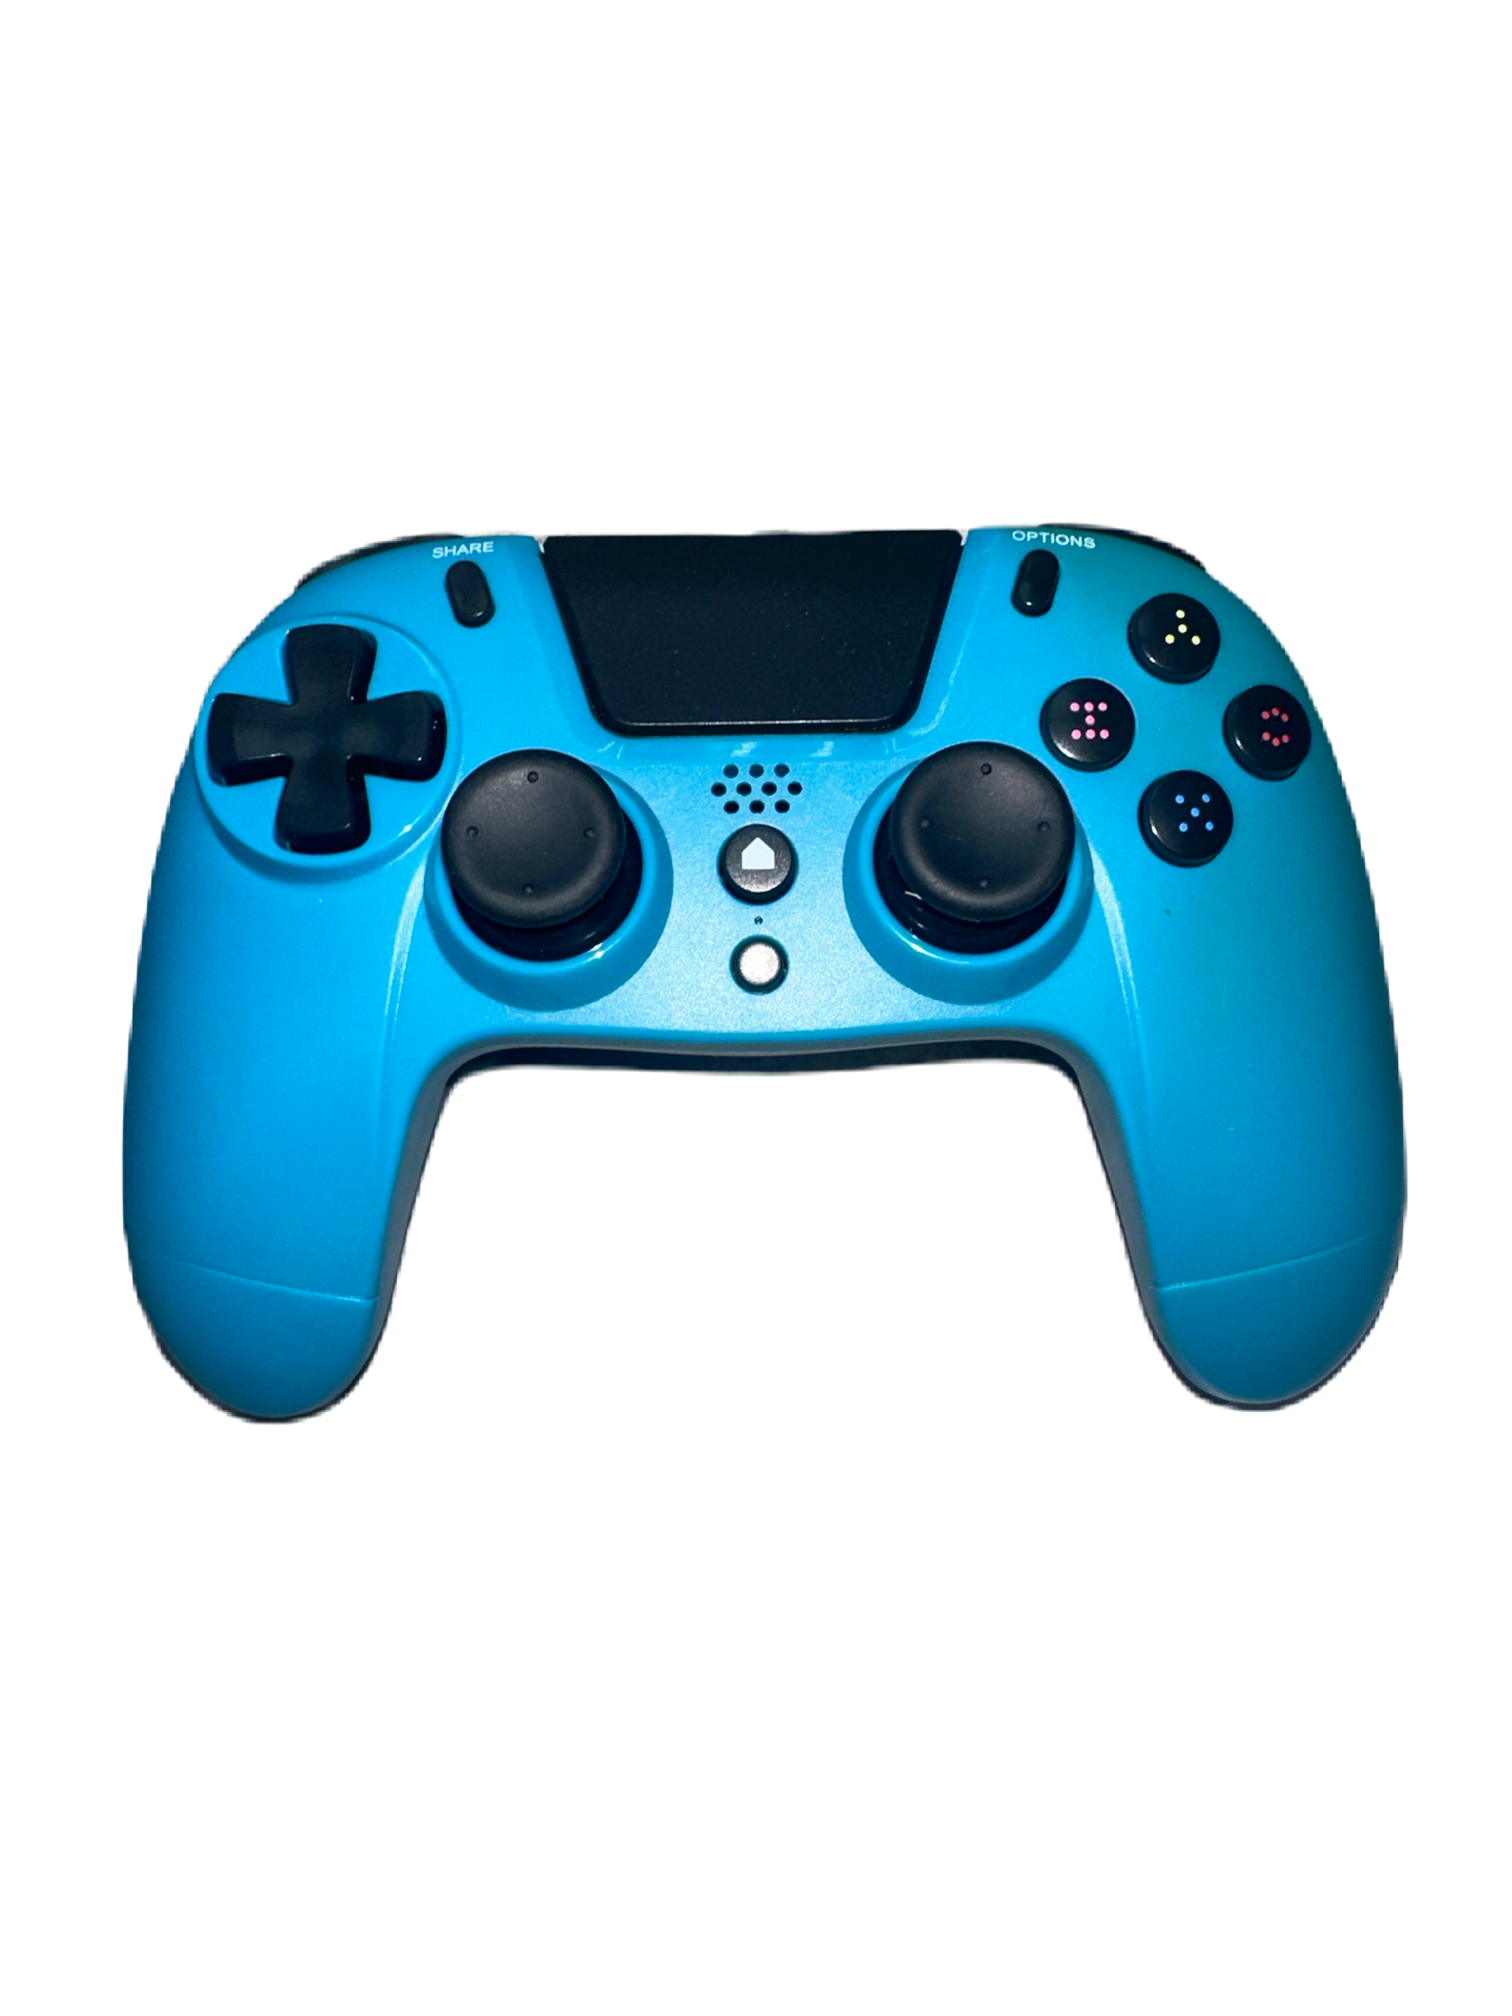 PS4 VX4 Wired - Blue Controller